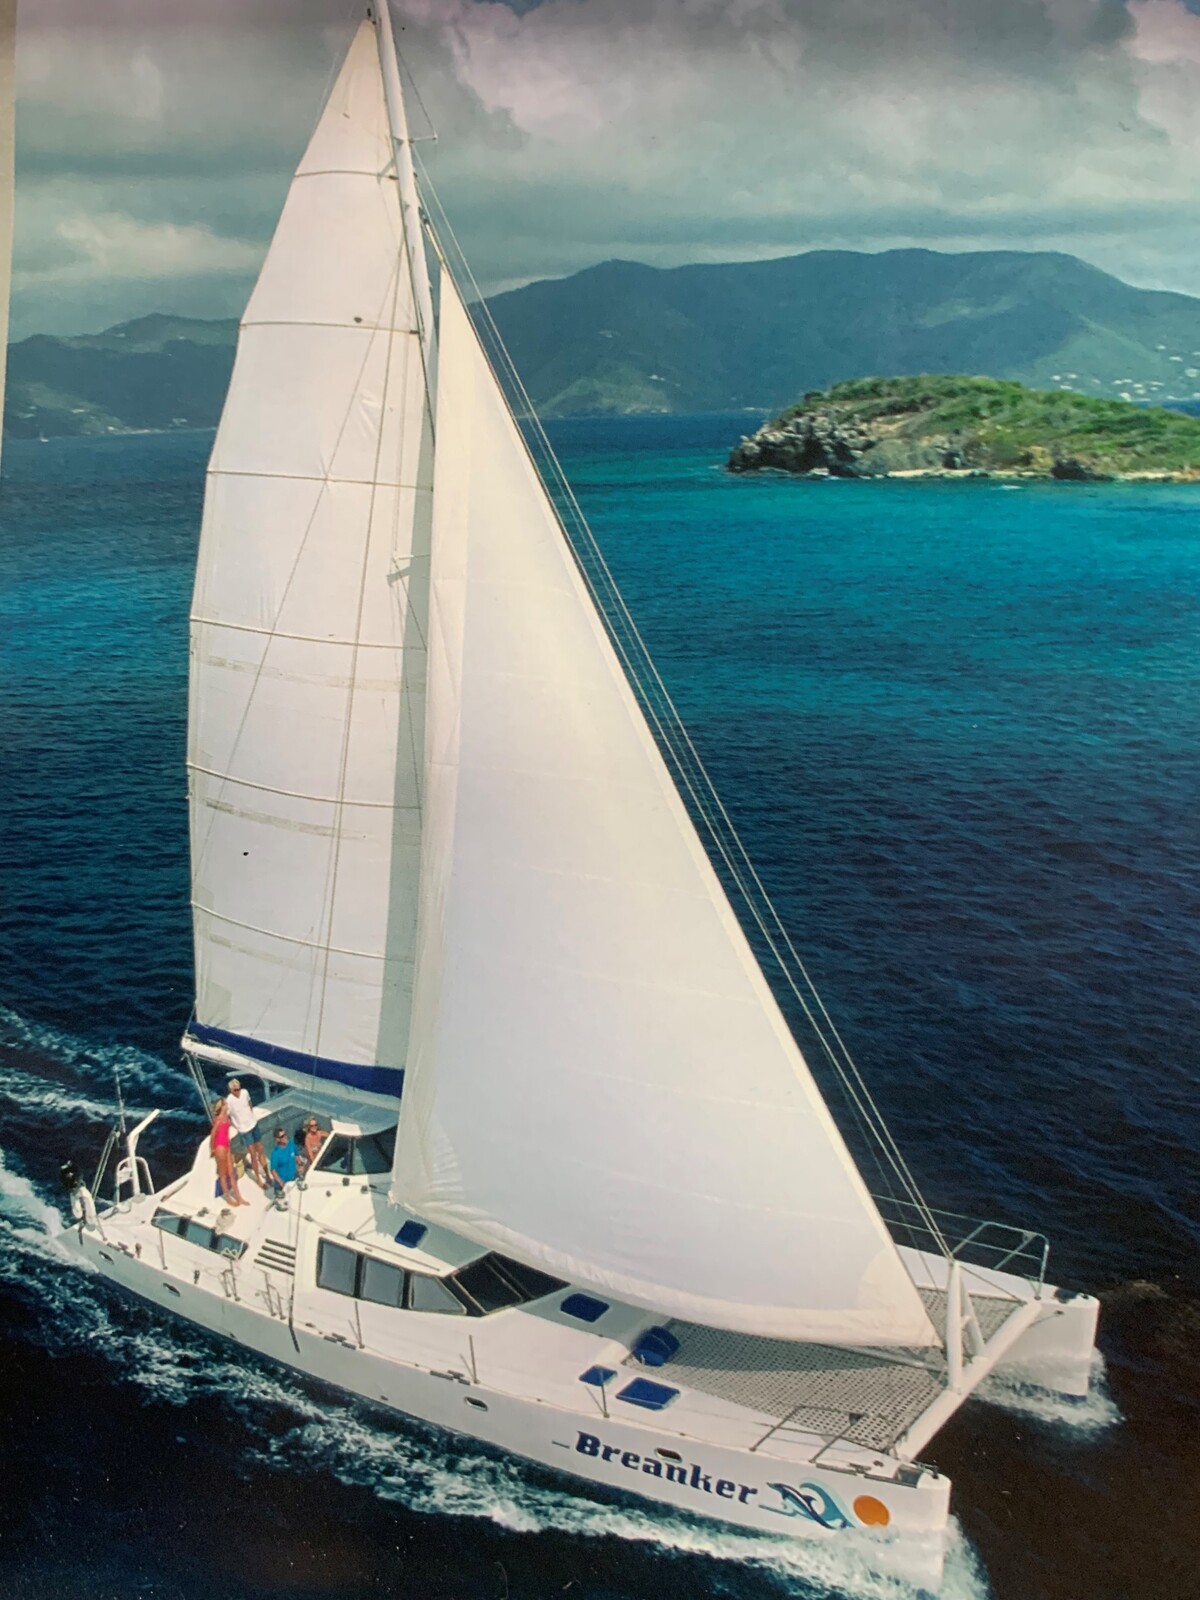 See why people Rave about the Amazing BVI crewed catamaran “Breanker”